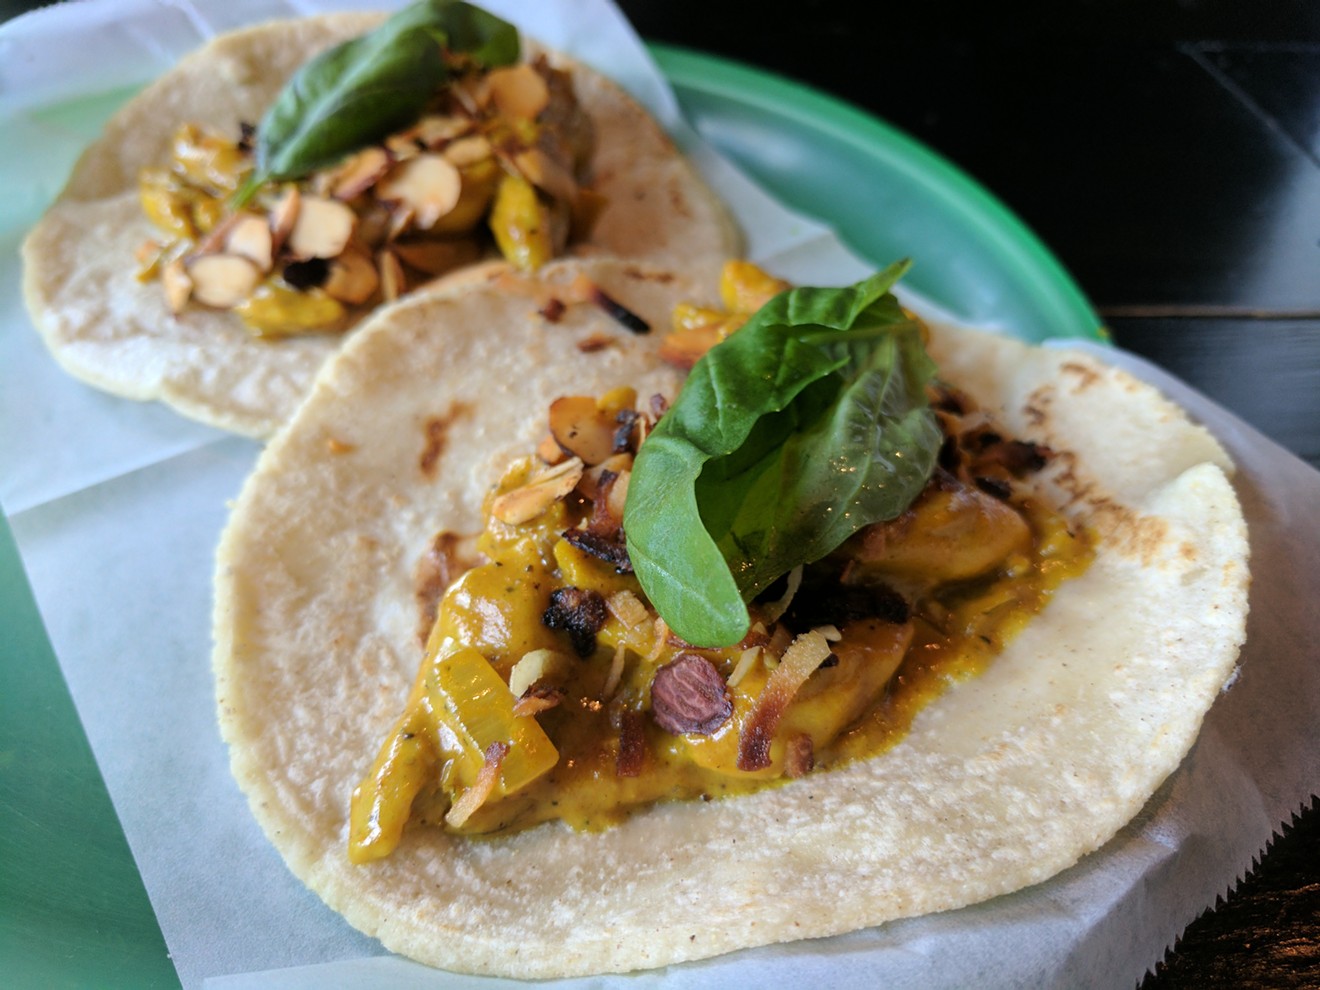 The Kermit in Bangkok taco at Revolver Taco Lounge features housemade Thai yellow curry sauce.